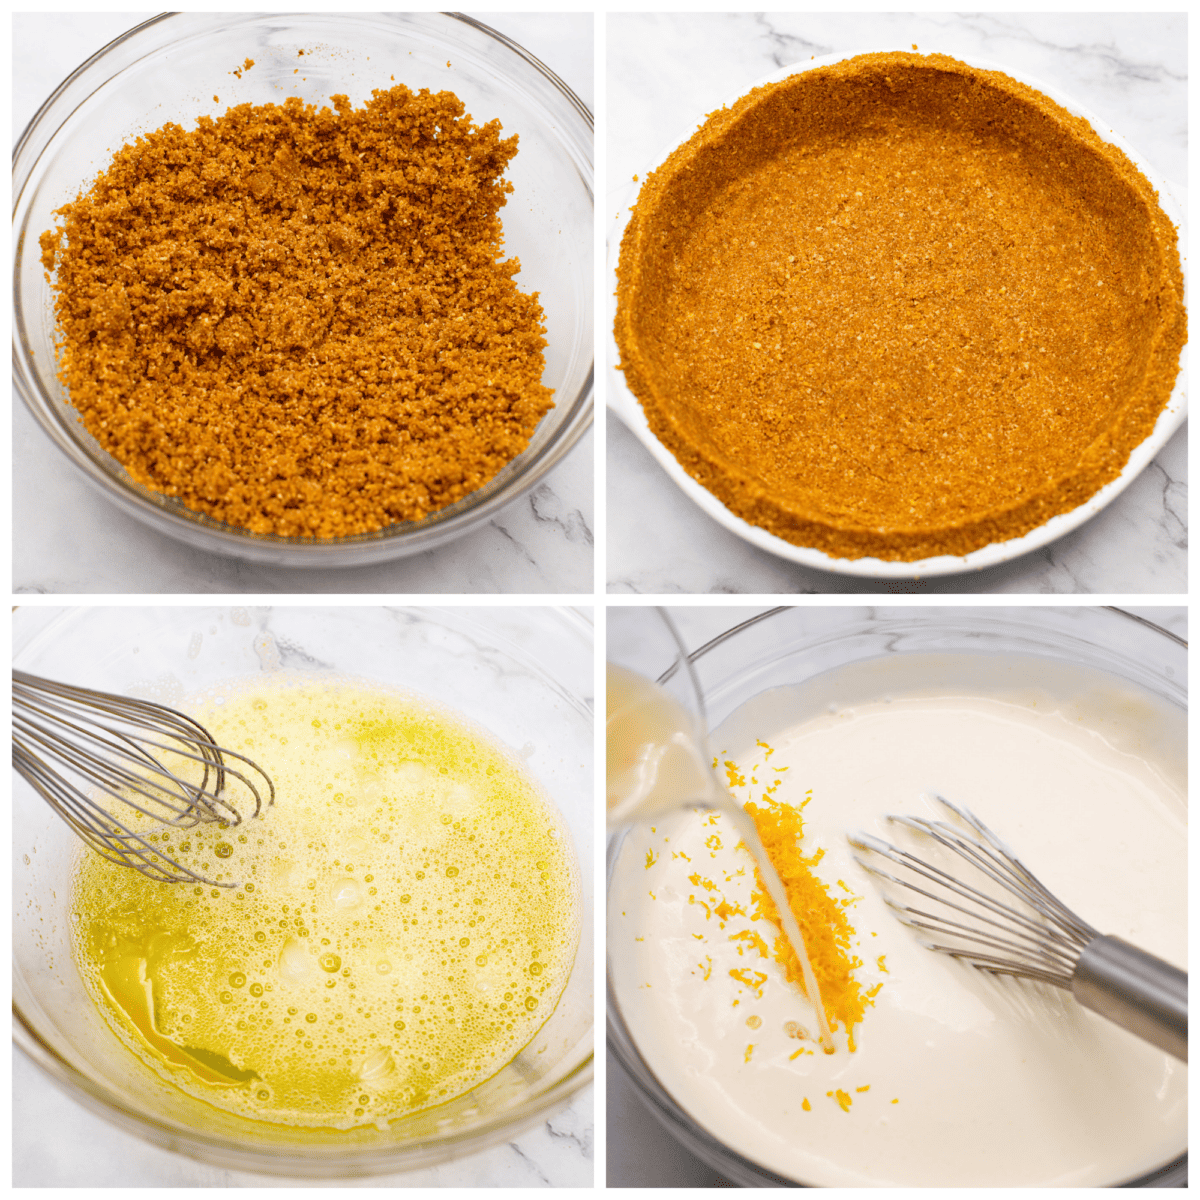 First photo of graham cracker crust mixed together in a bowl. Second photo of the crust pressed into a pie dish. Third photo of the jello dissolved in water. Fourth photo of the whipped cream, zest, and lemon juice being mixed into the filling.